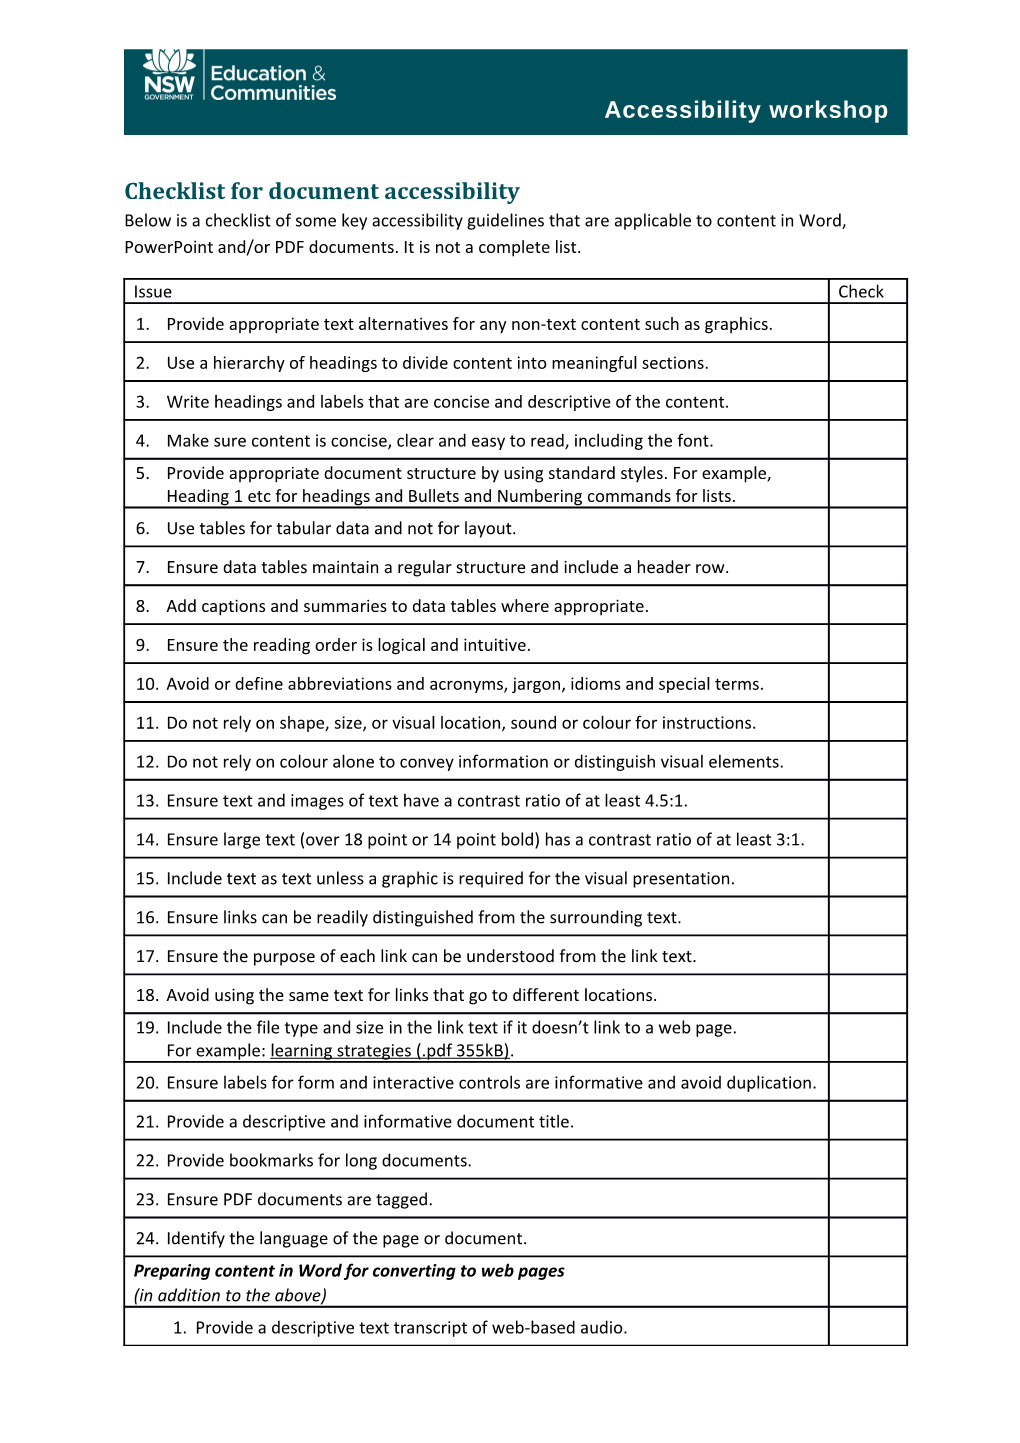 Checklist for Document Accessibility